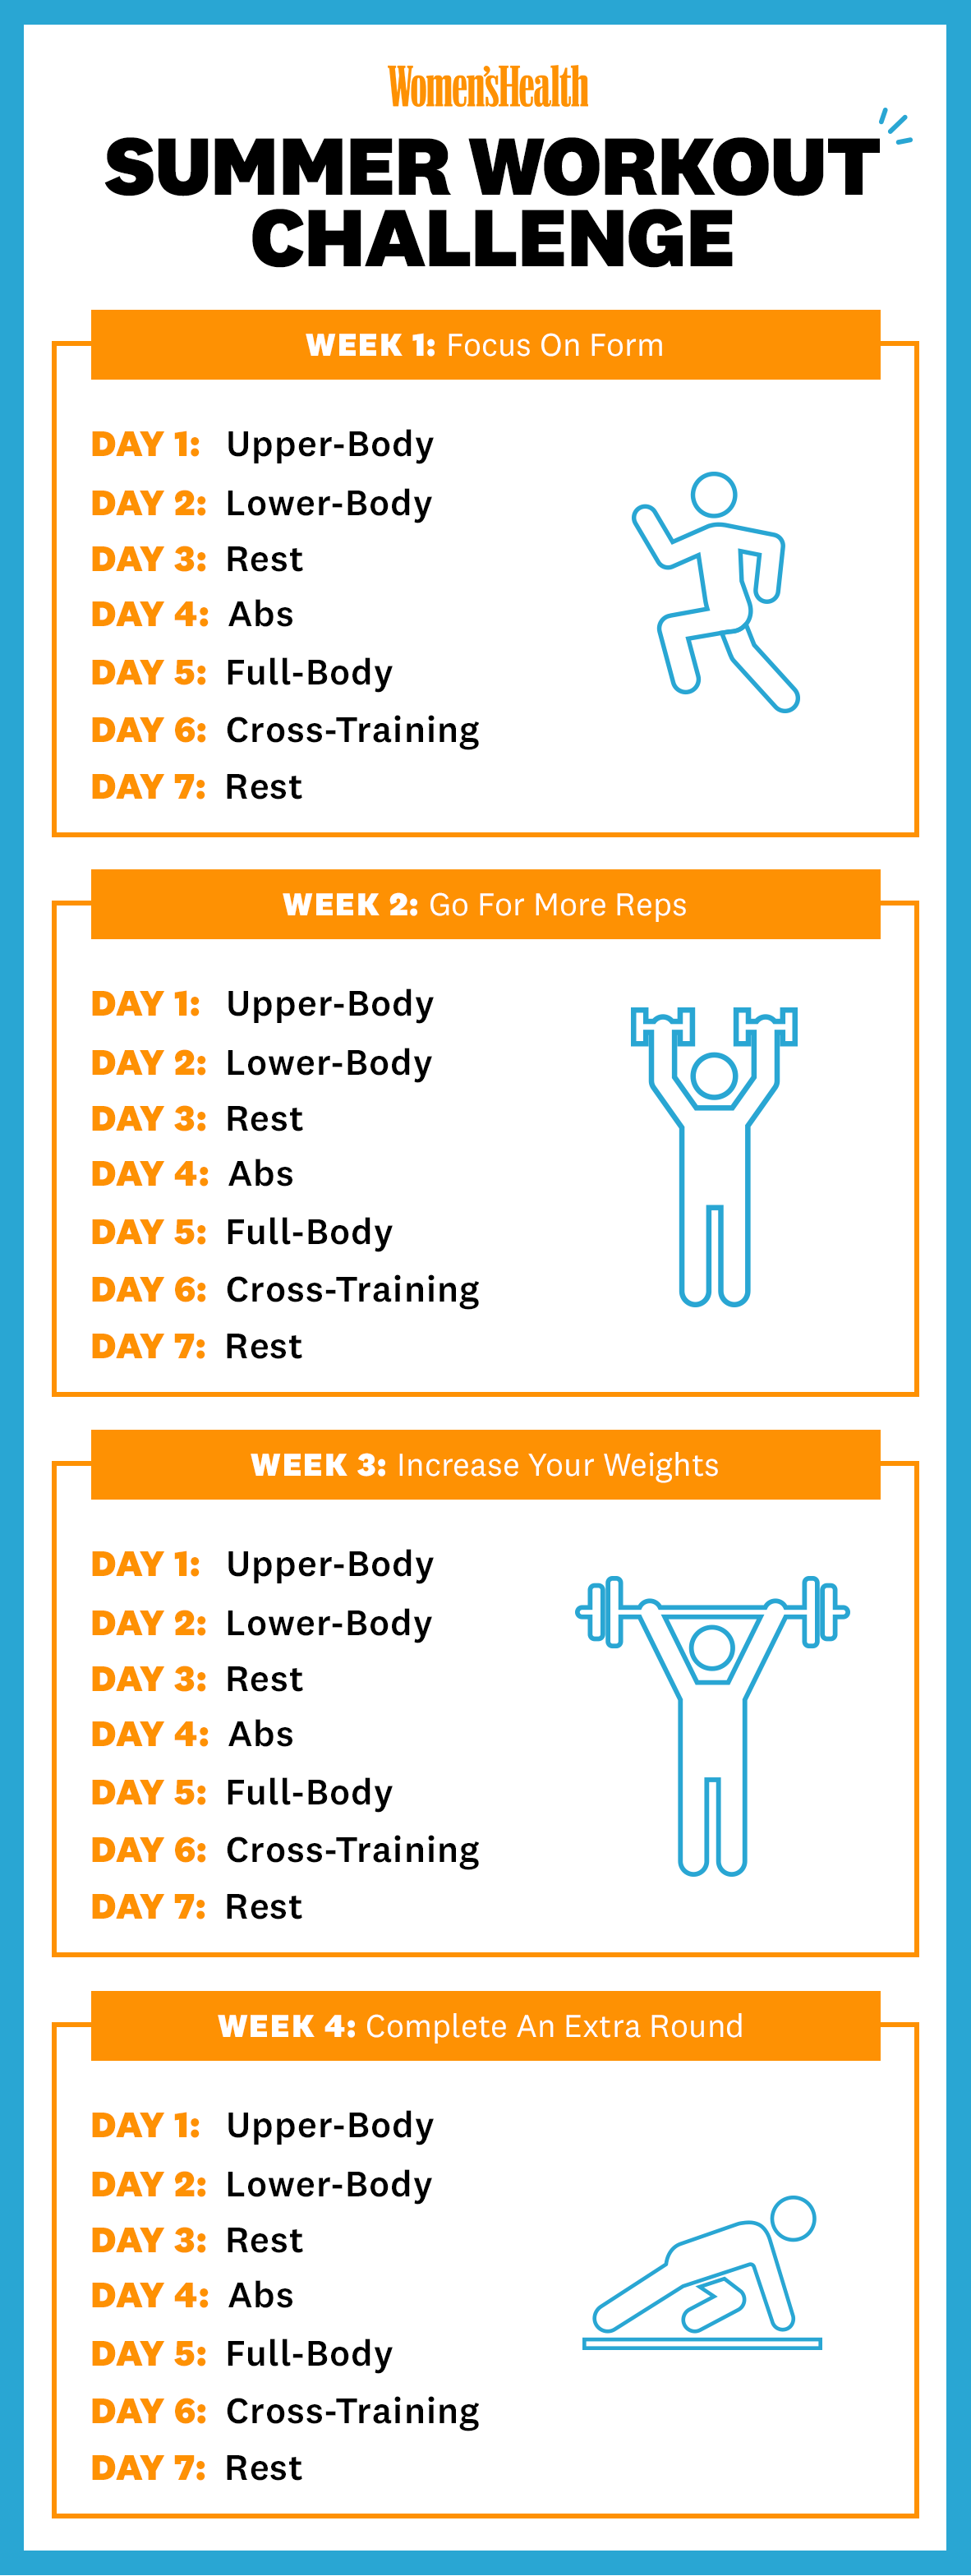 weekly workout schedule for women